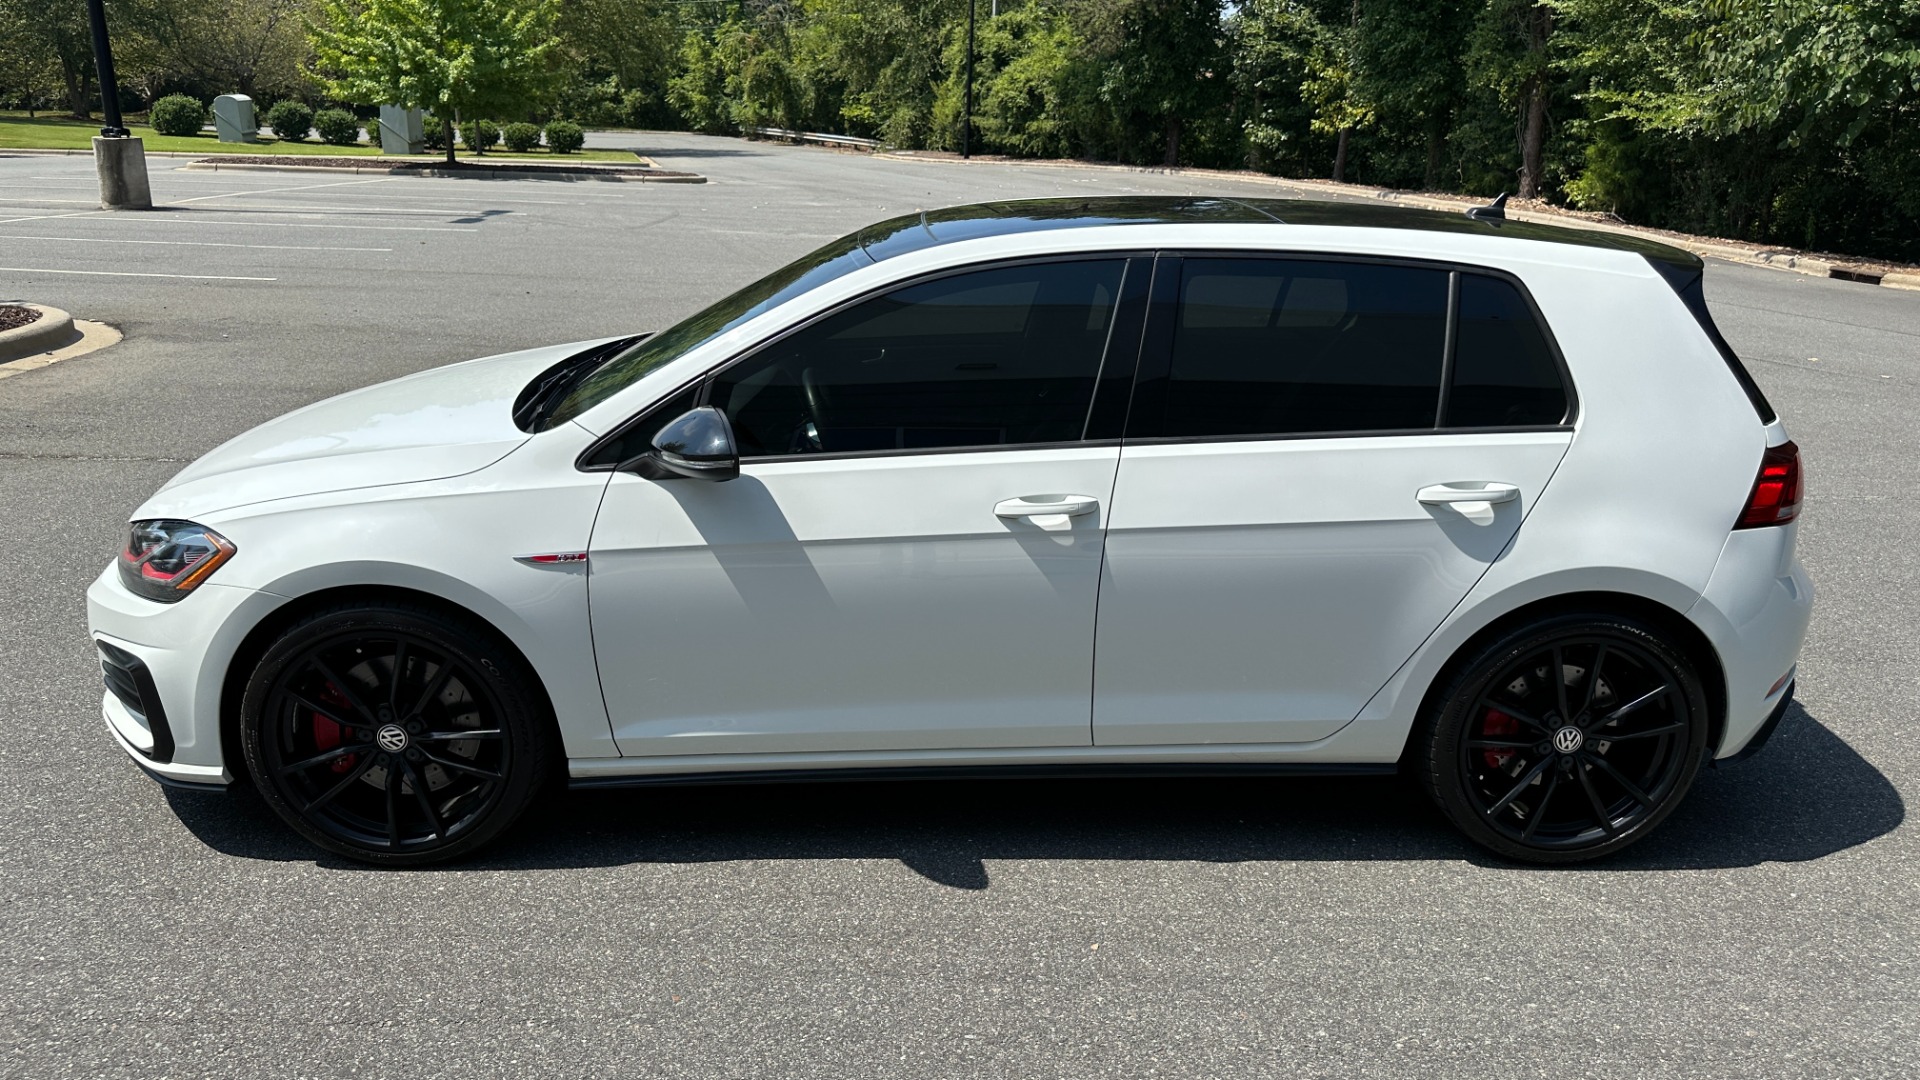 Used 2019 Volkswagen Golf GTI SE / CTS EXHAUST / CTS INTAKE / BLACKOUT / LEATHER for sale $26,000 at Formula Imports in Charlotte NC 28227 3